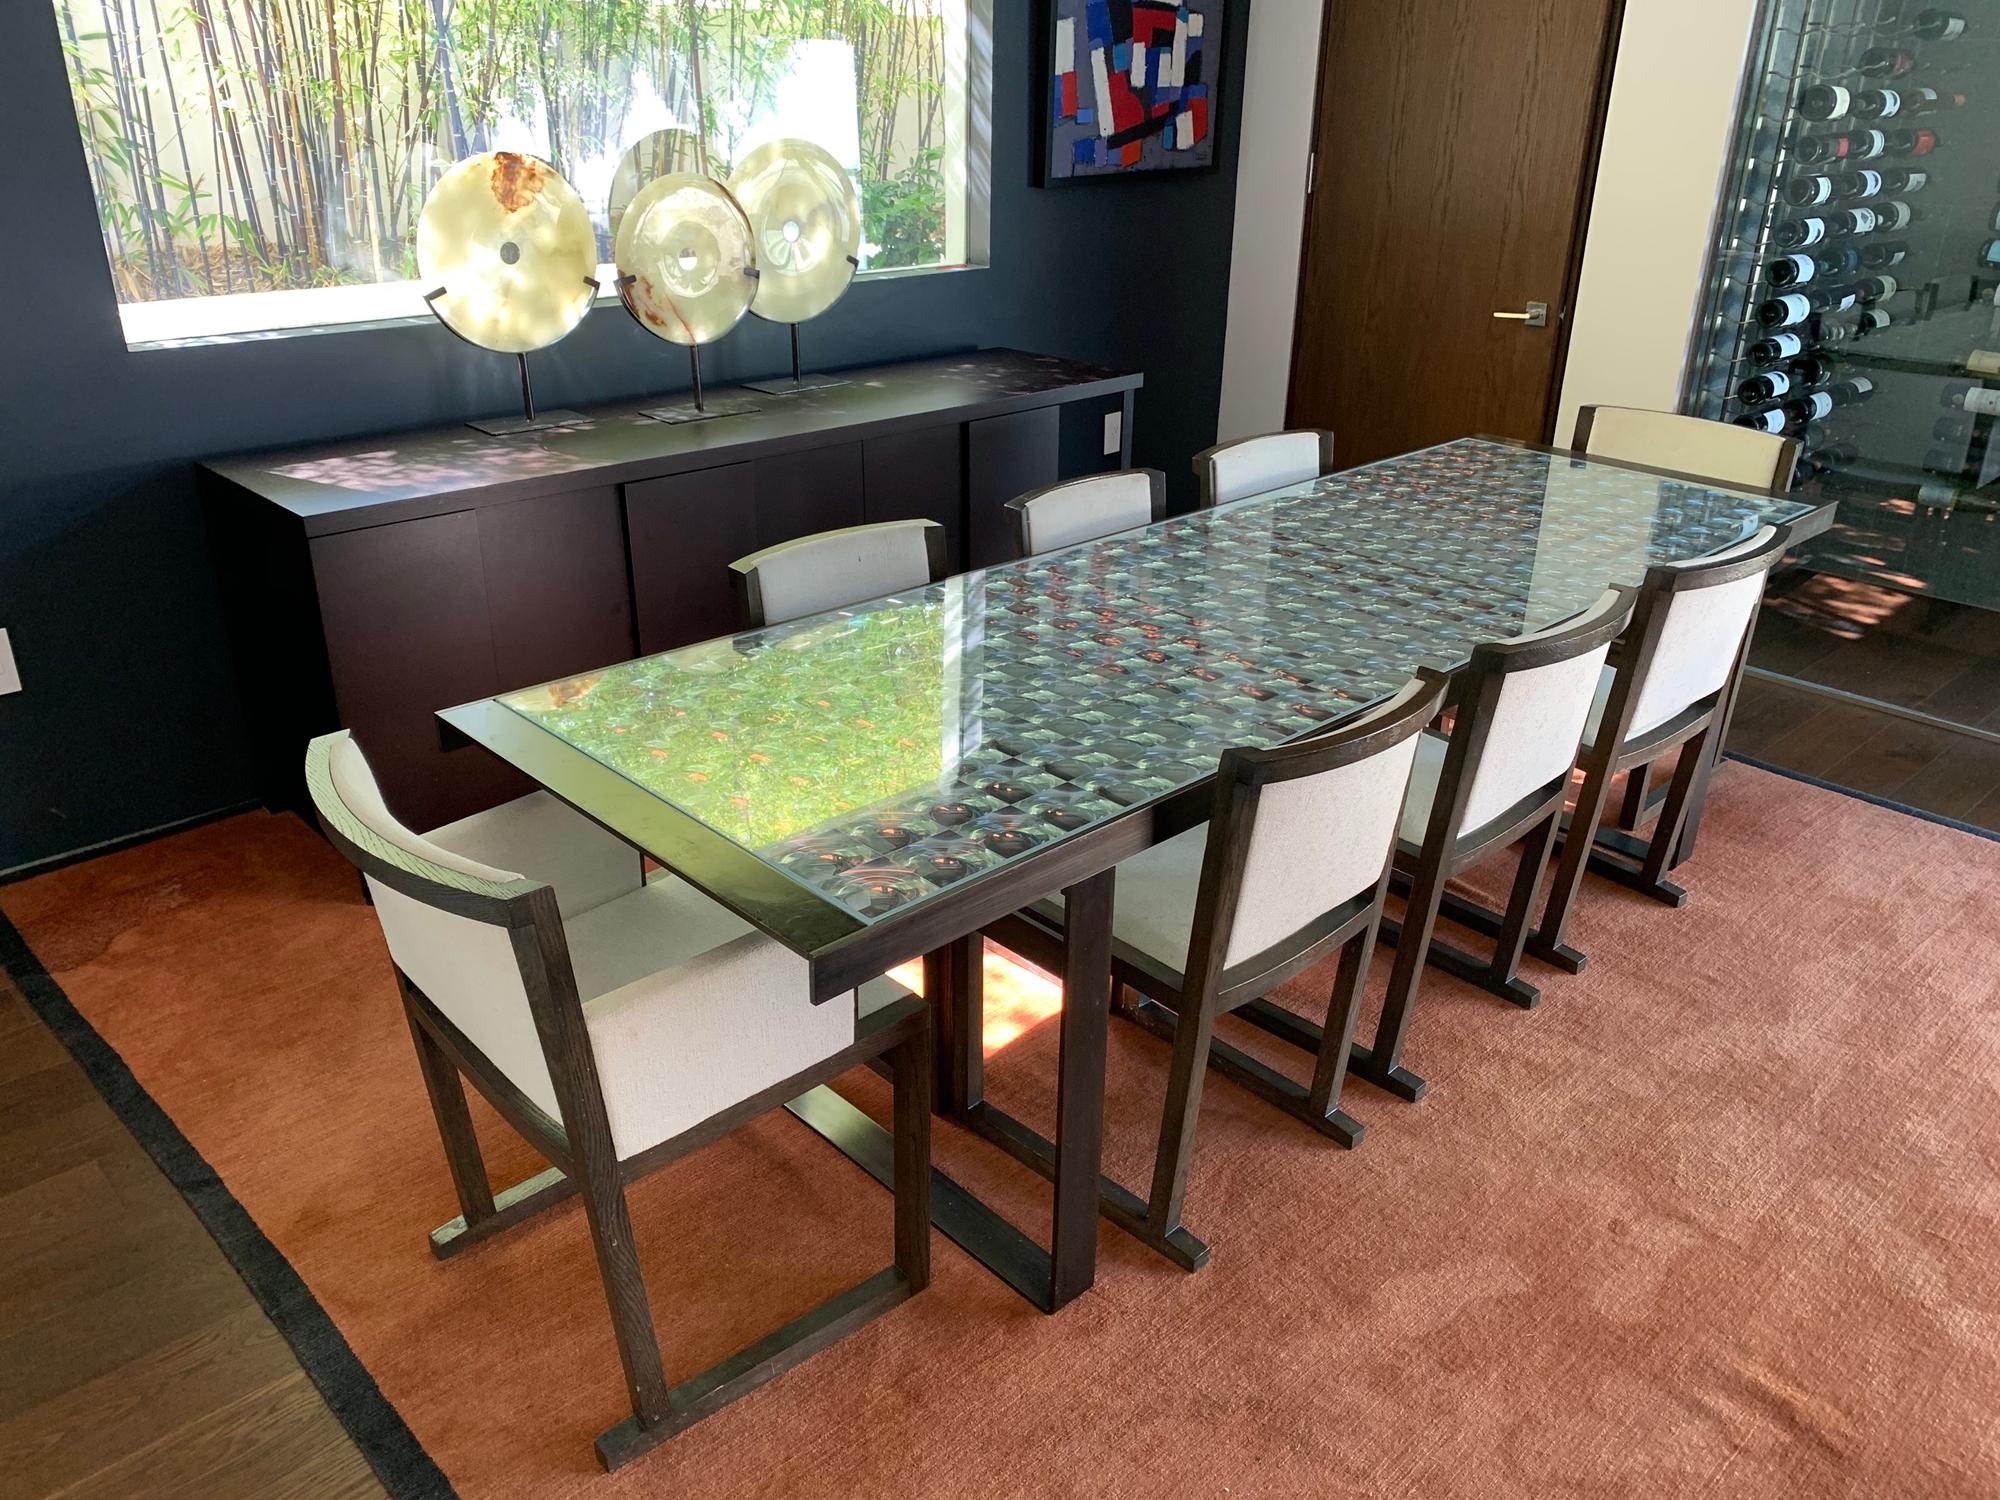 Beautiful dining table designed and manufactured in Italy by Patricia Urquiola for B&B Italia.
The table shows well, the metal shows surface wear and loss to finish, there are scratches and it needs to be refinished, glass is intact and in